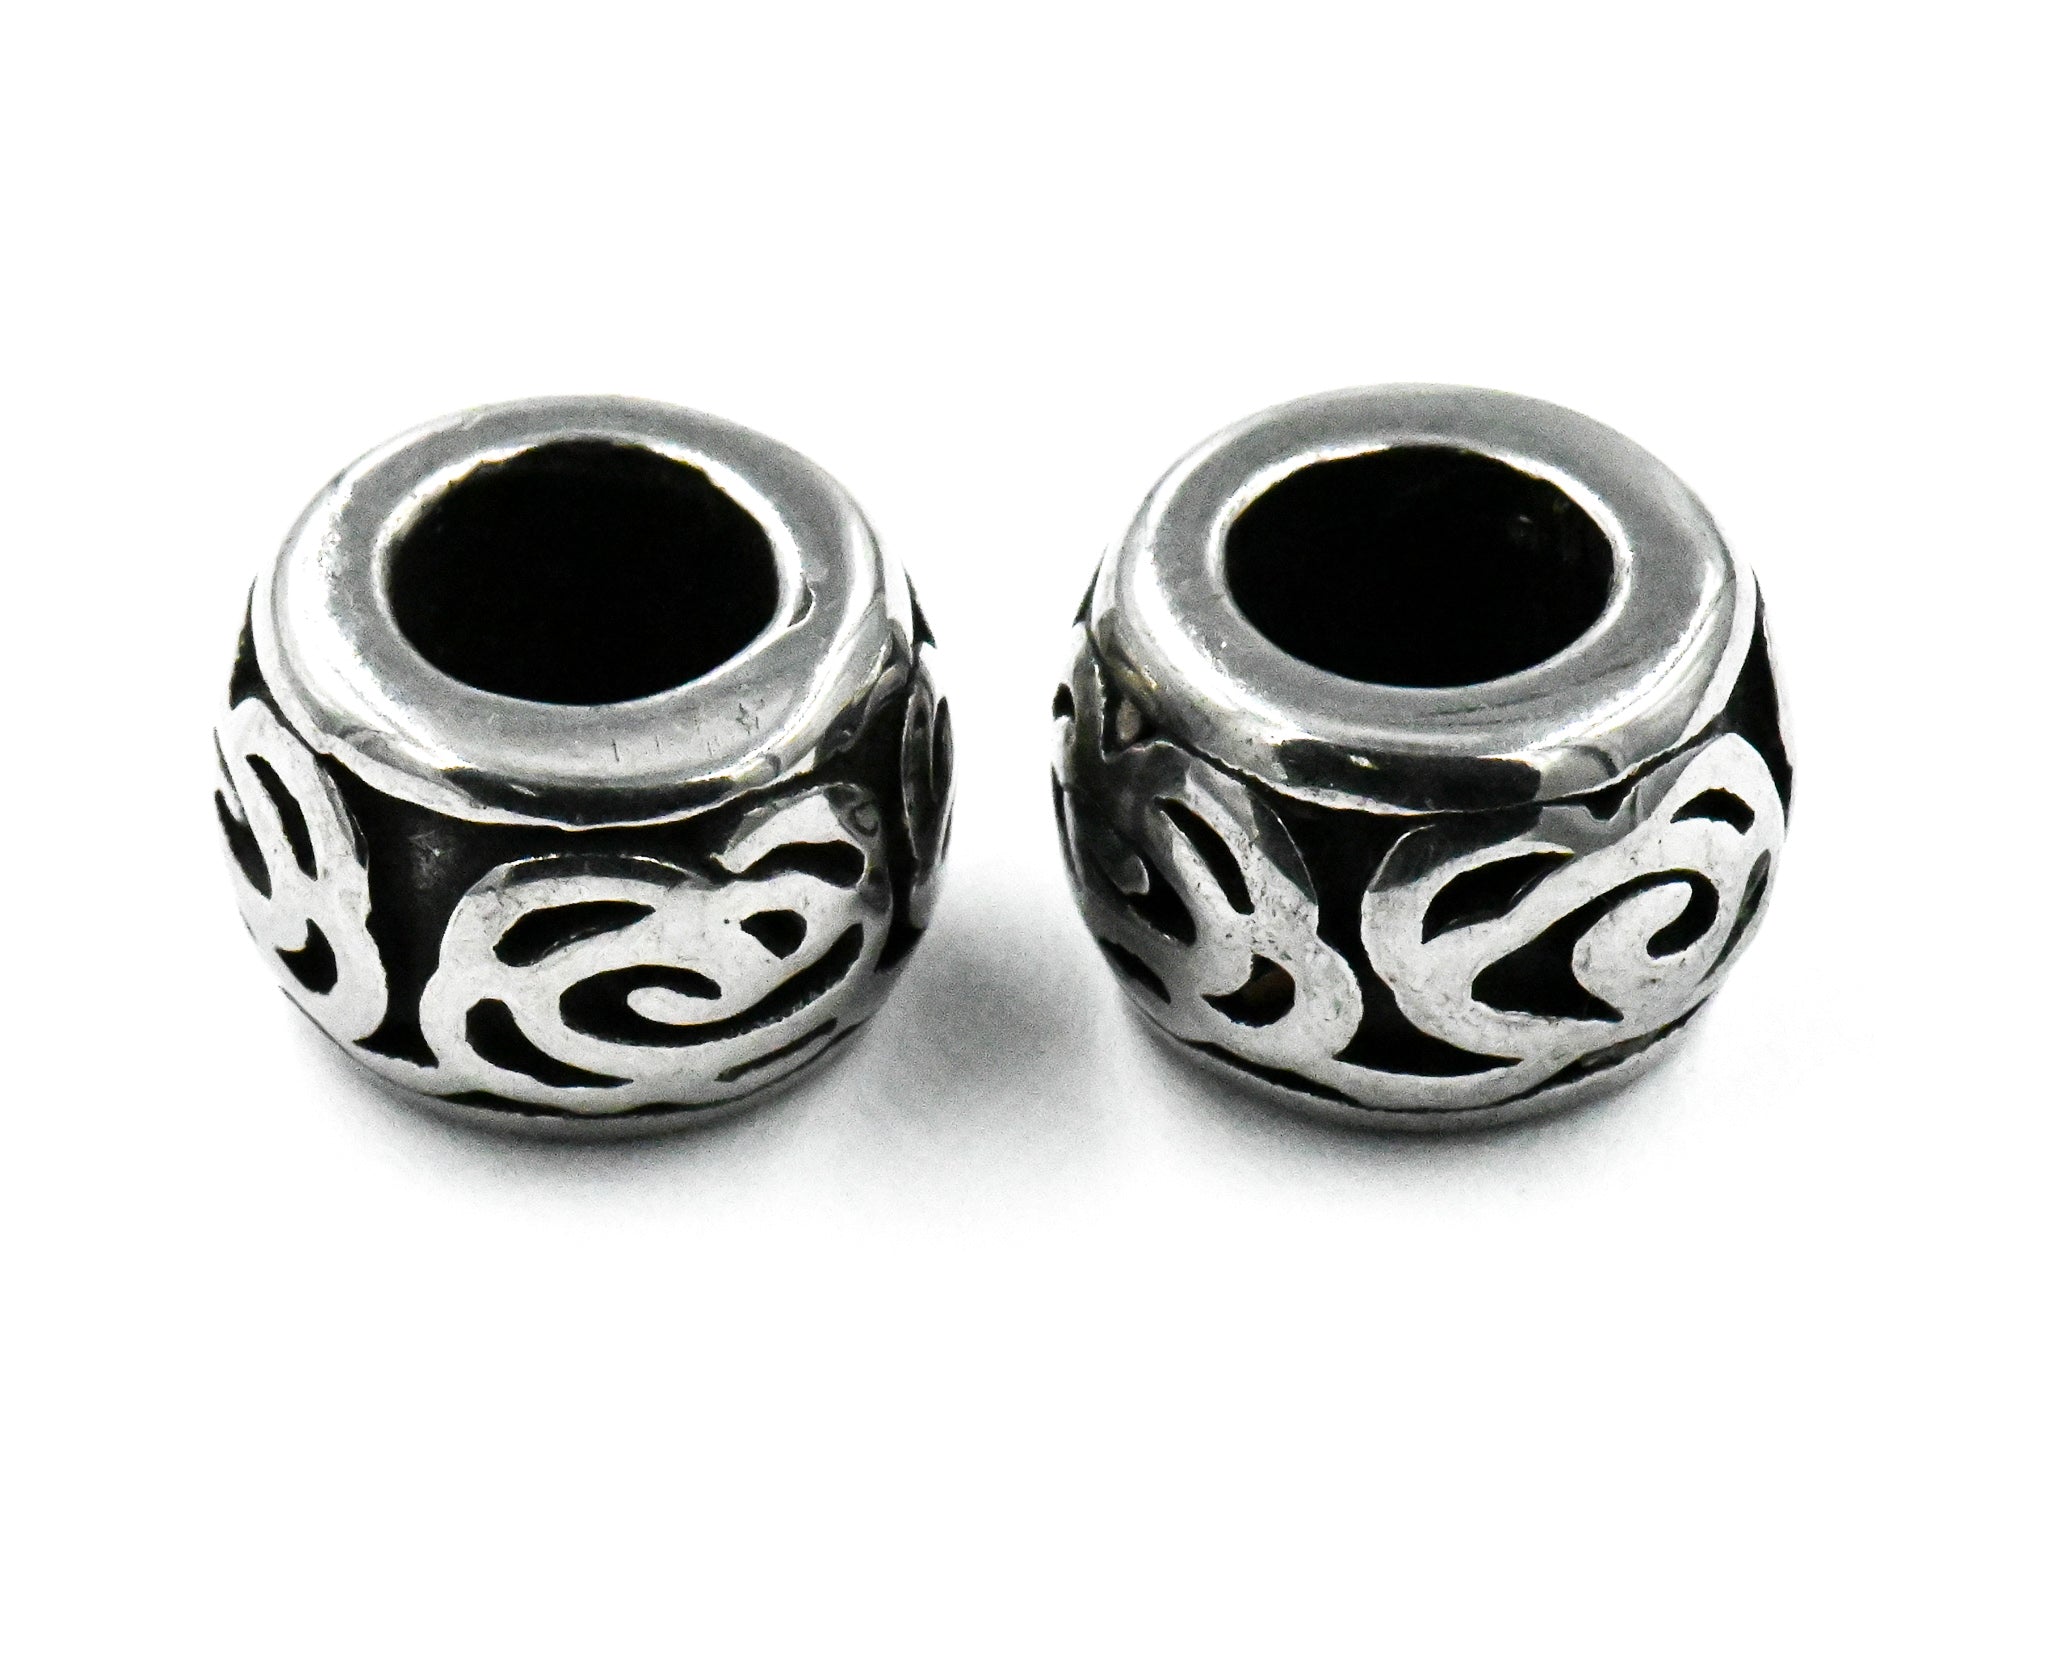 Stainless Steel Beads, 2pc, Large Hole Beads, 12mm Antique Silver